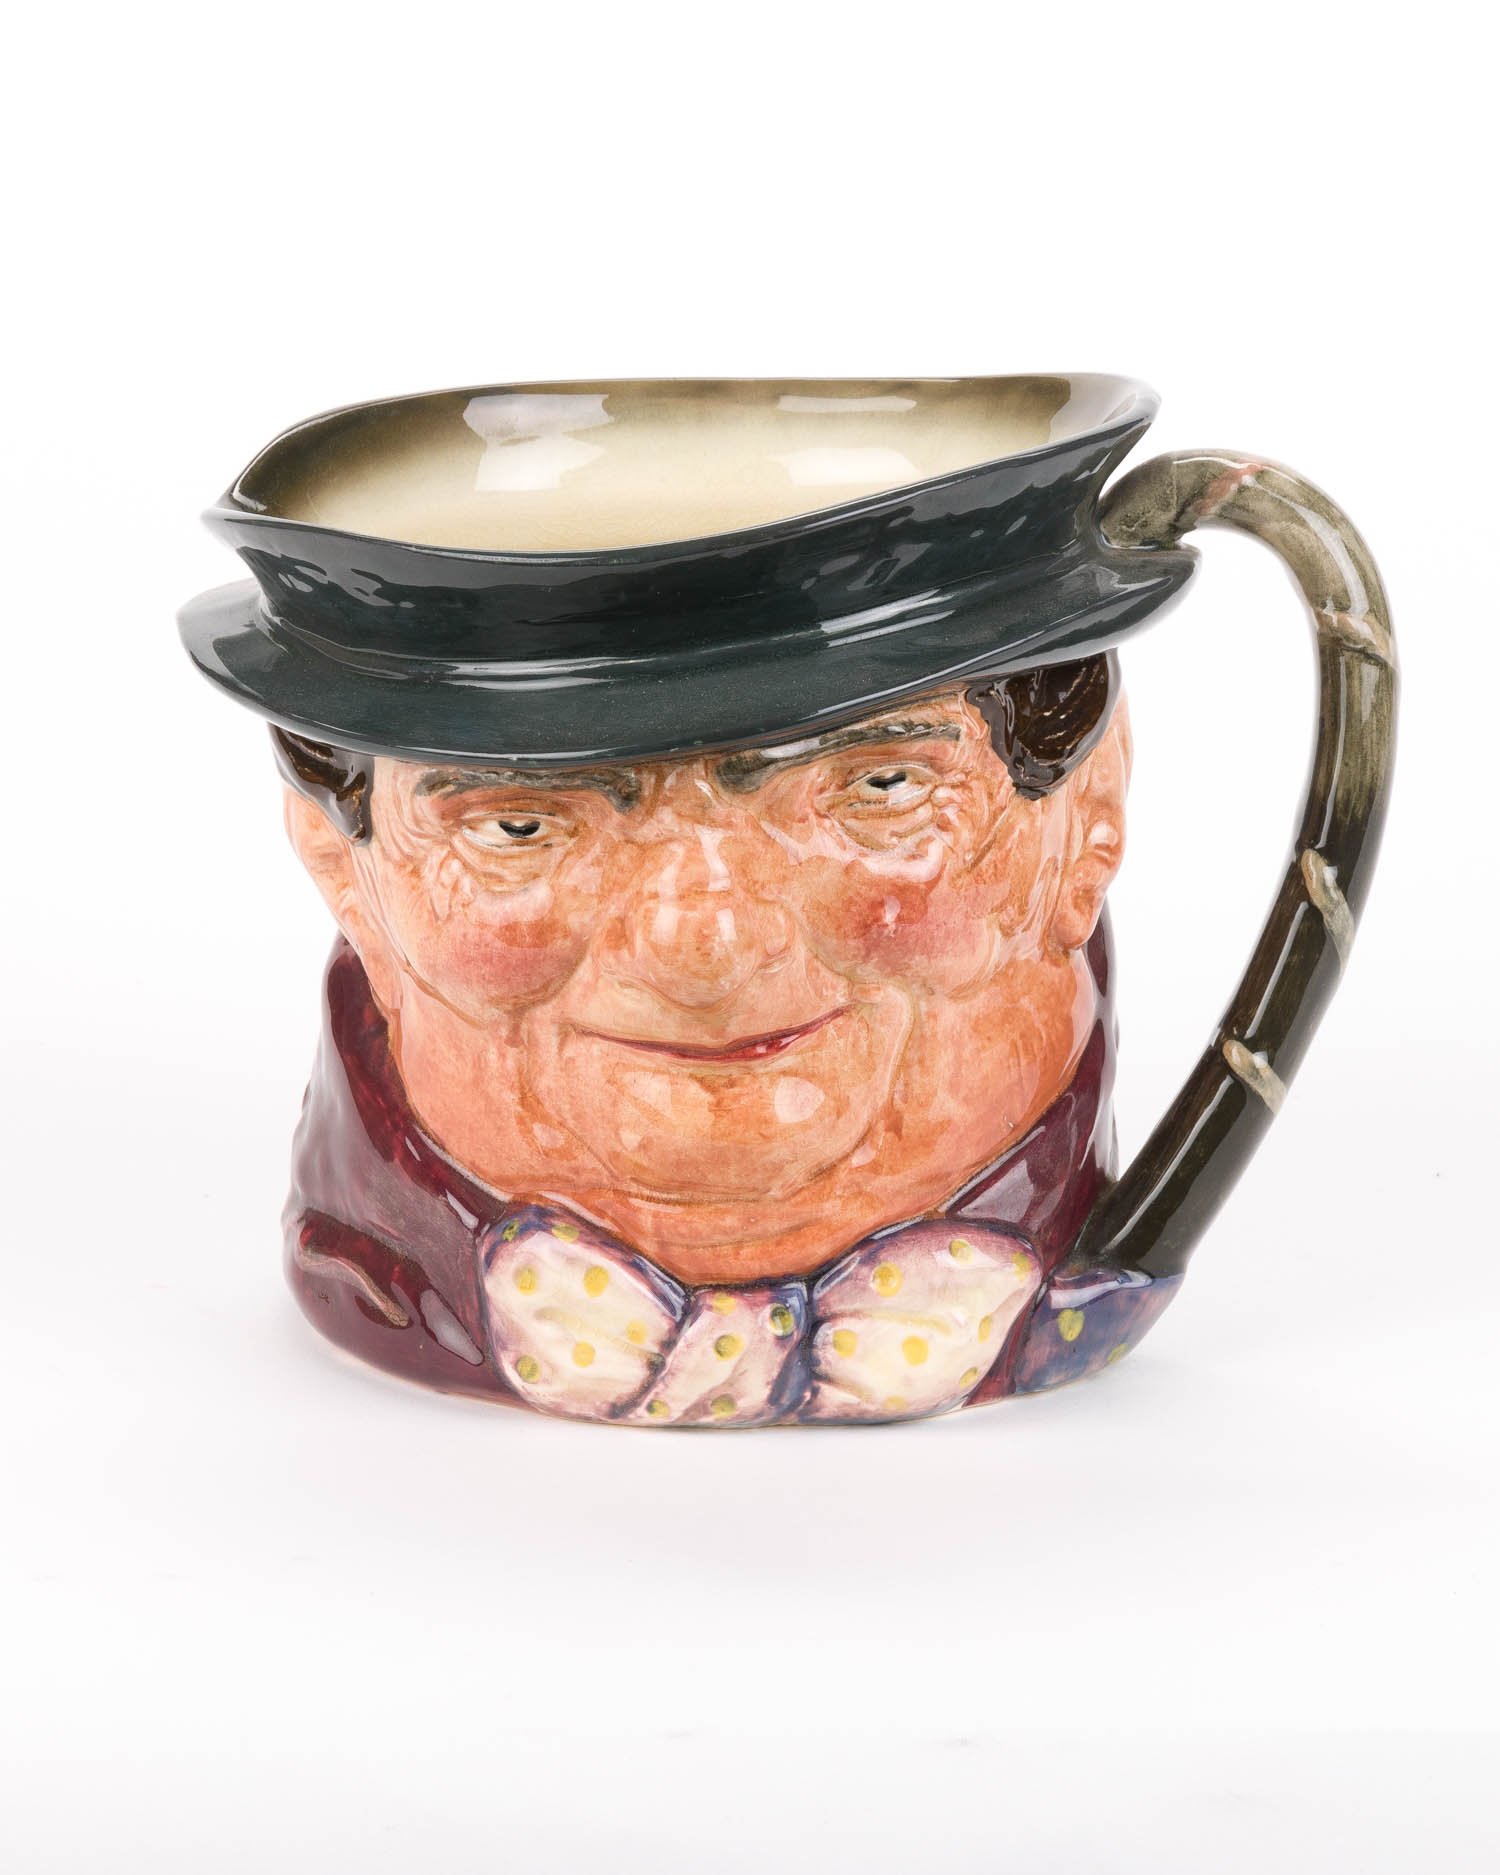 TONY WELLER ROYAL DOULTON TOBY JUG — The Turnage Place